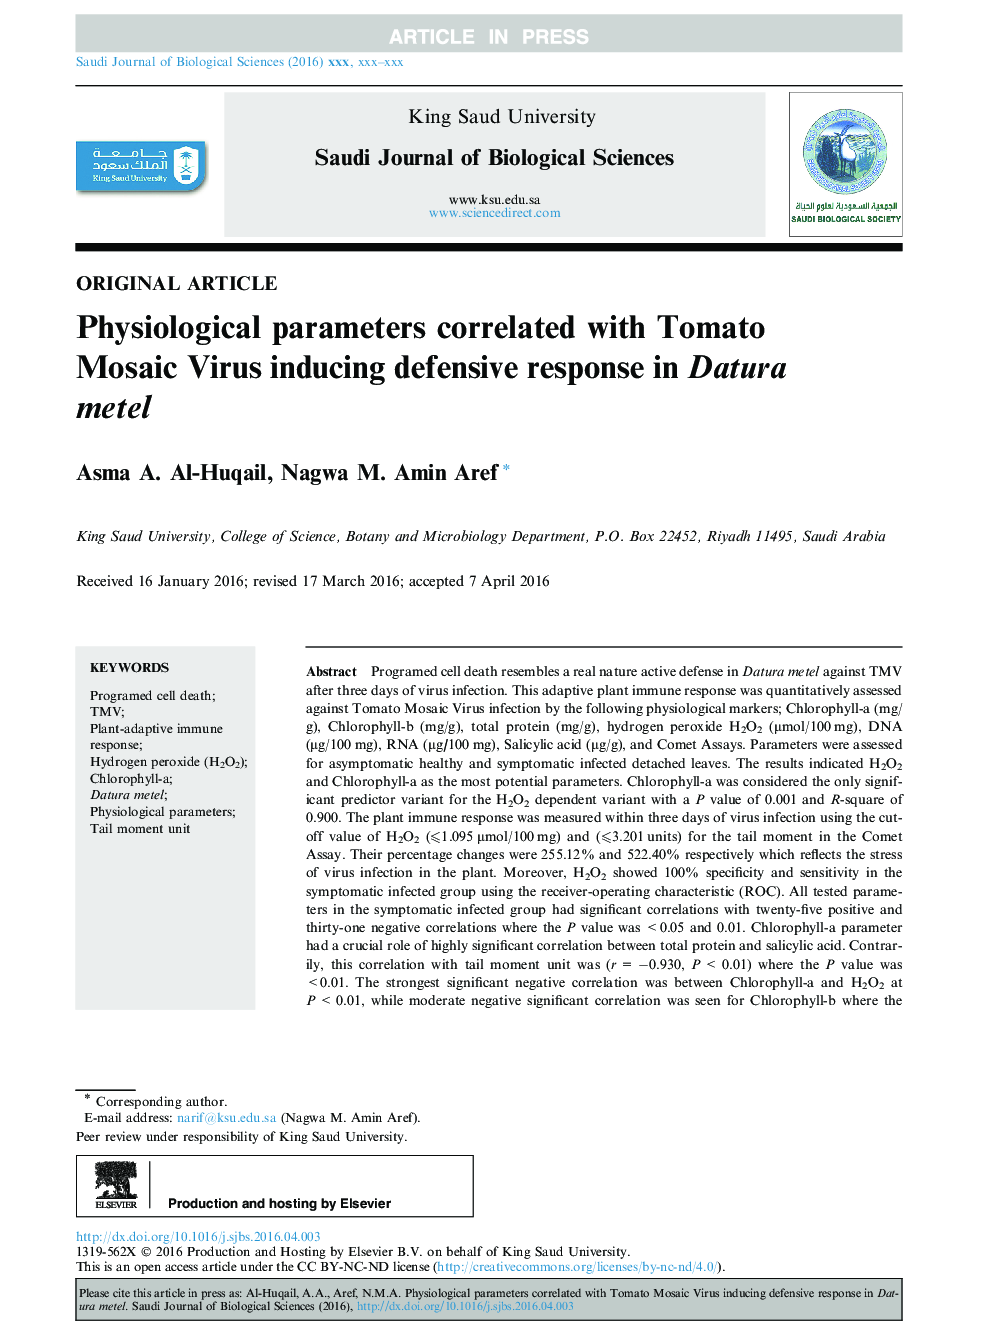 Physiological parameters correlated with Tomato Mosaic Virus inducing defensive response in Datura metel